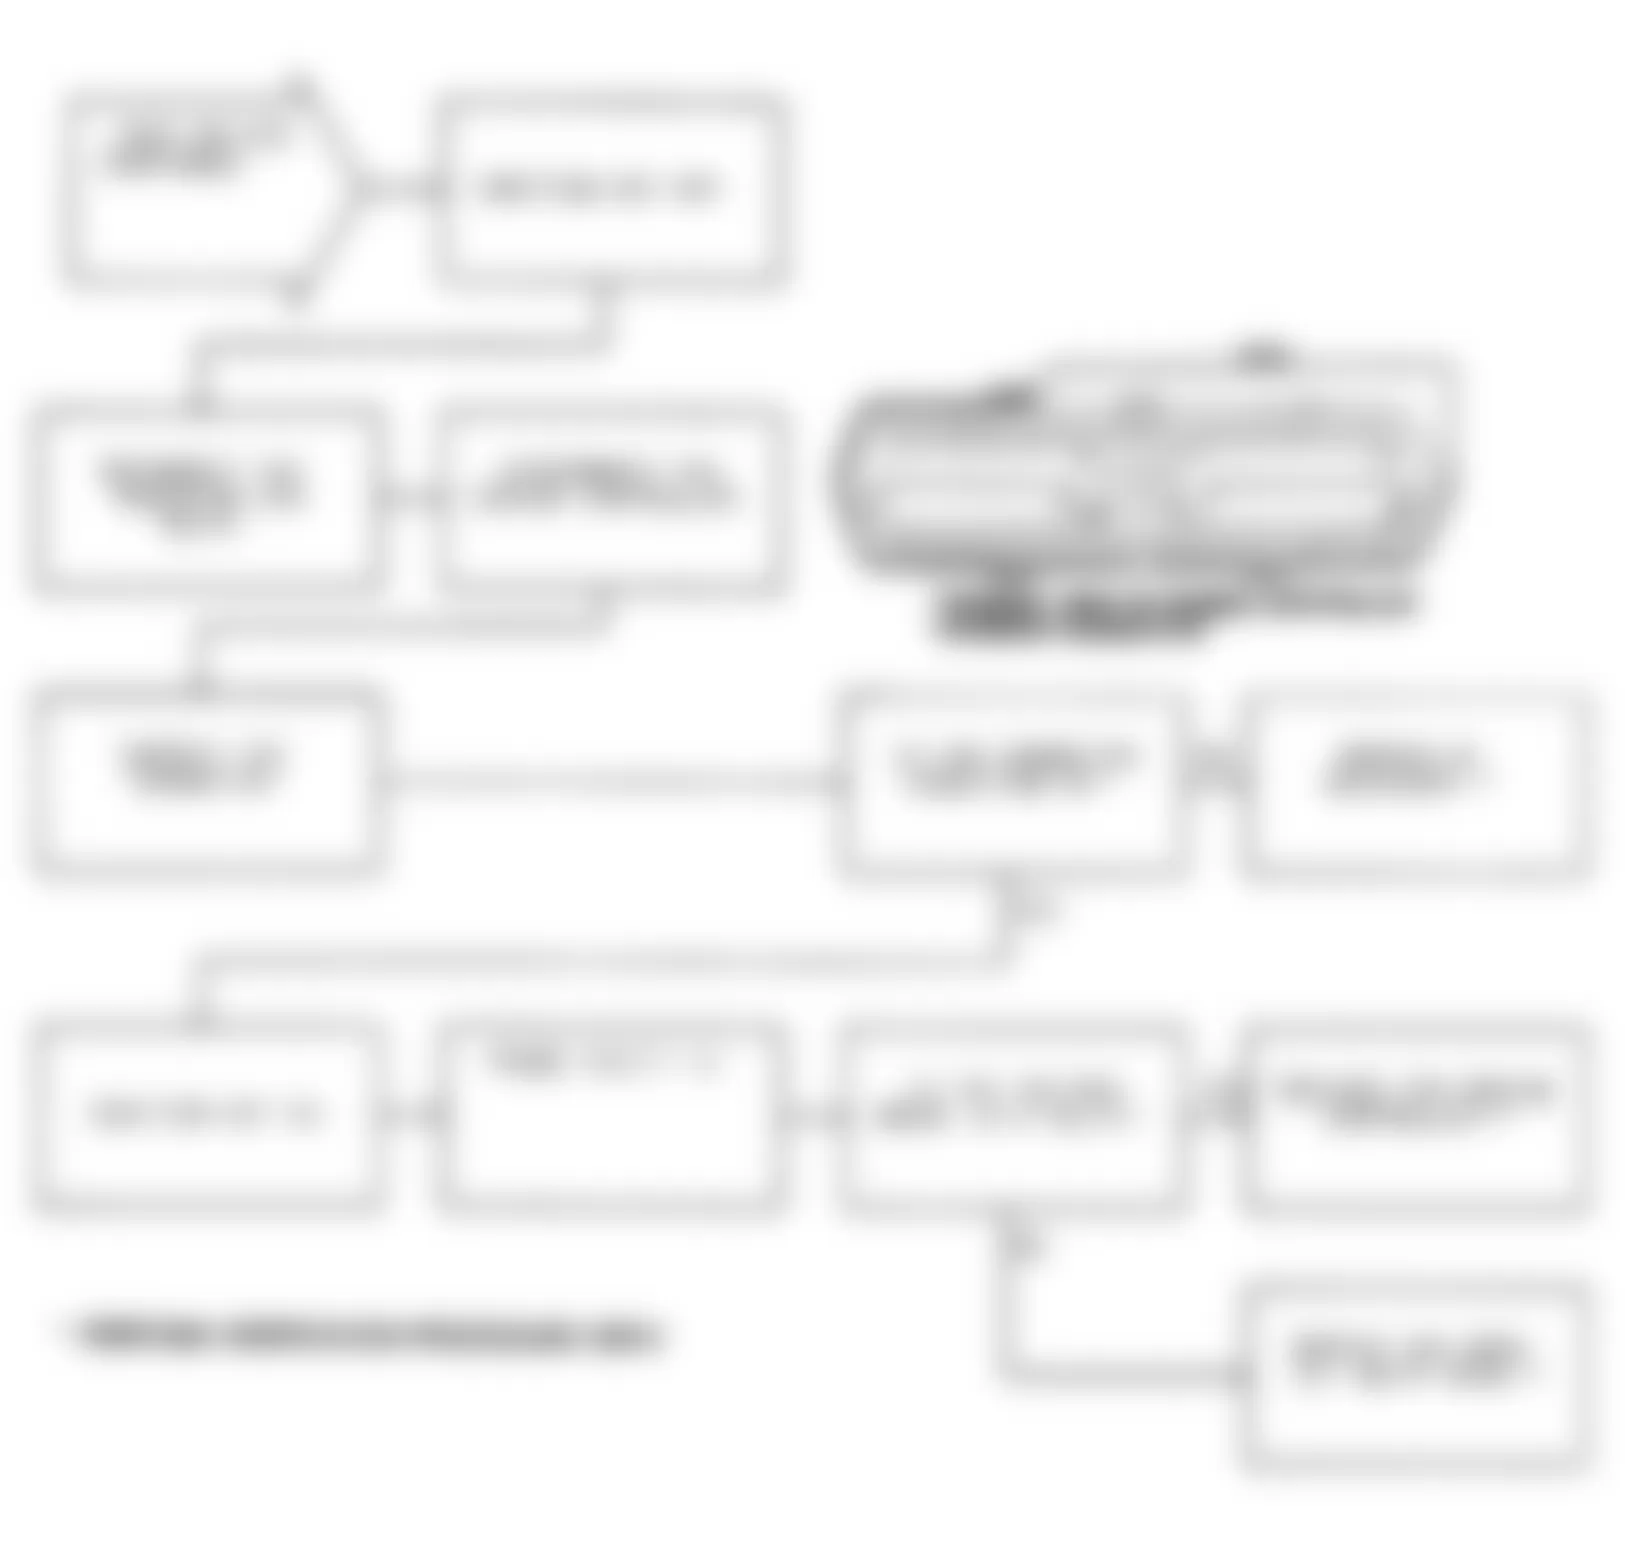 Chrysler New Yorker Fifth Avenue 1991 - Component Locations -  Test DR-27A Code 35: Flowchart (2 of 2)